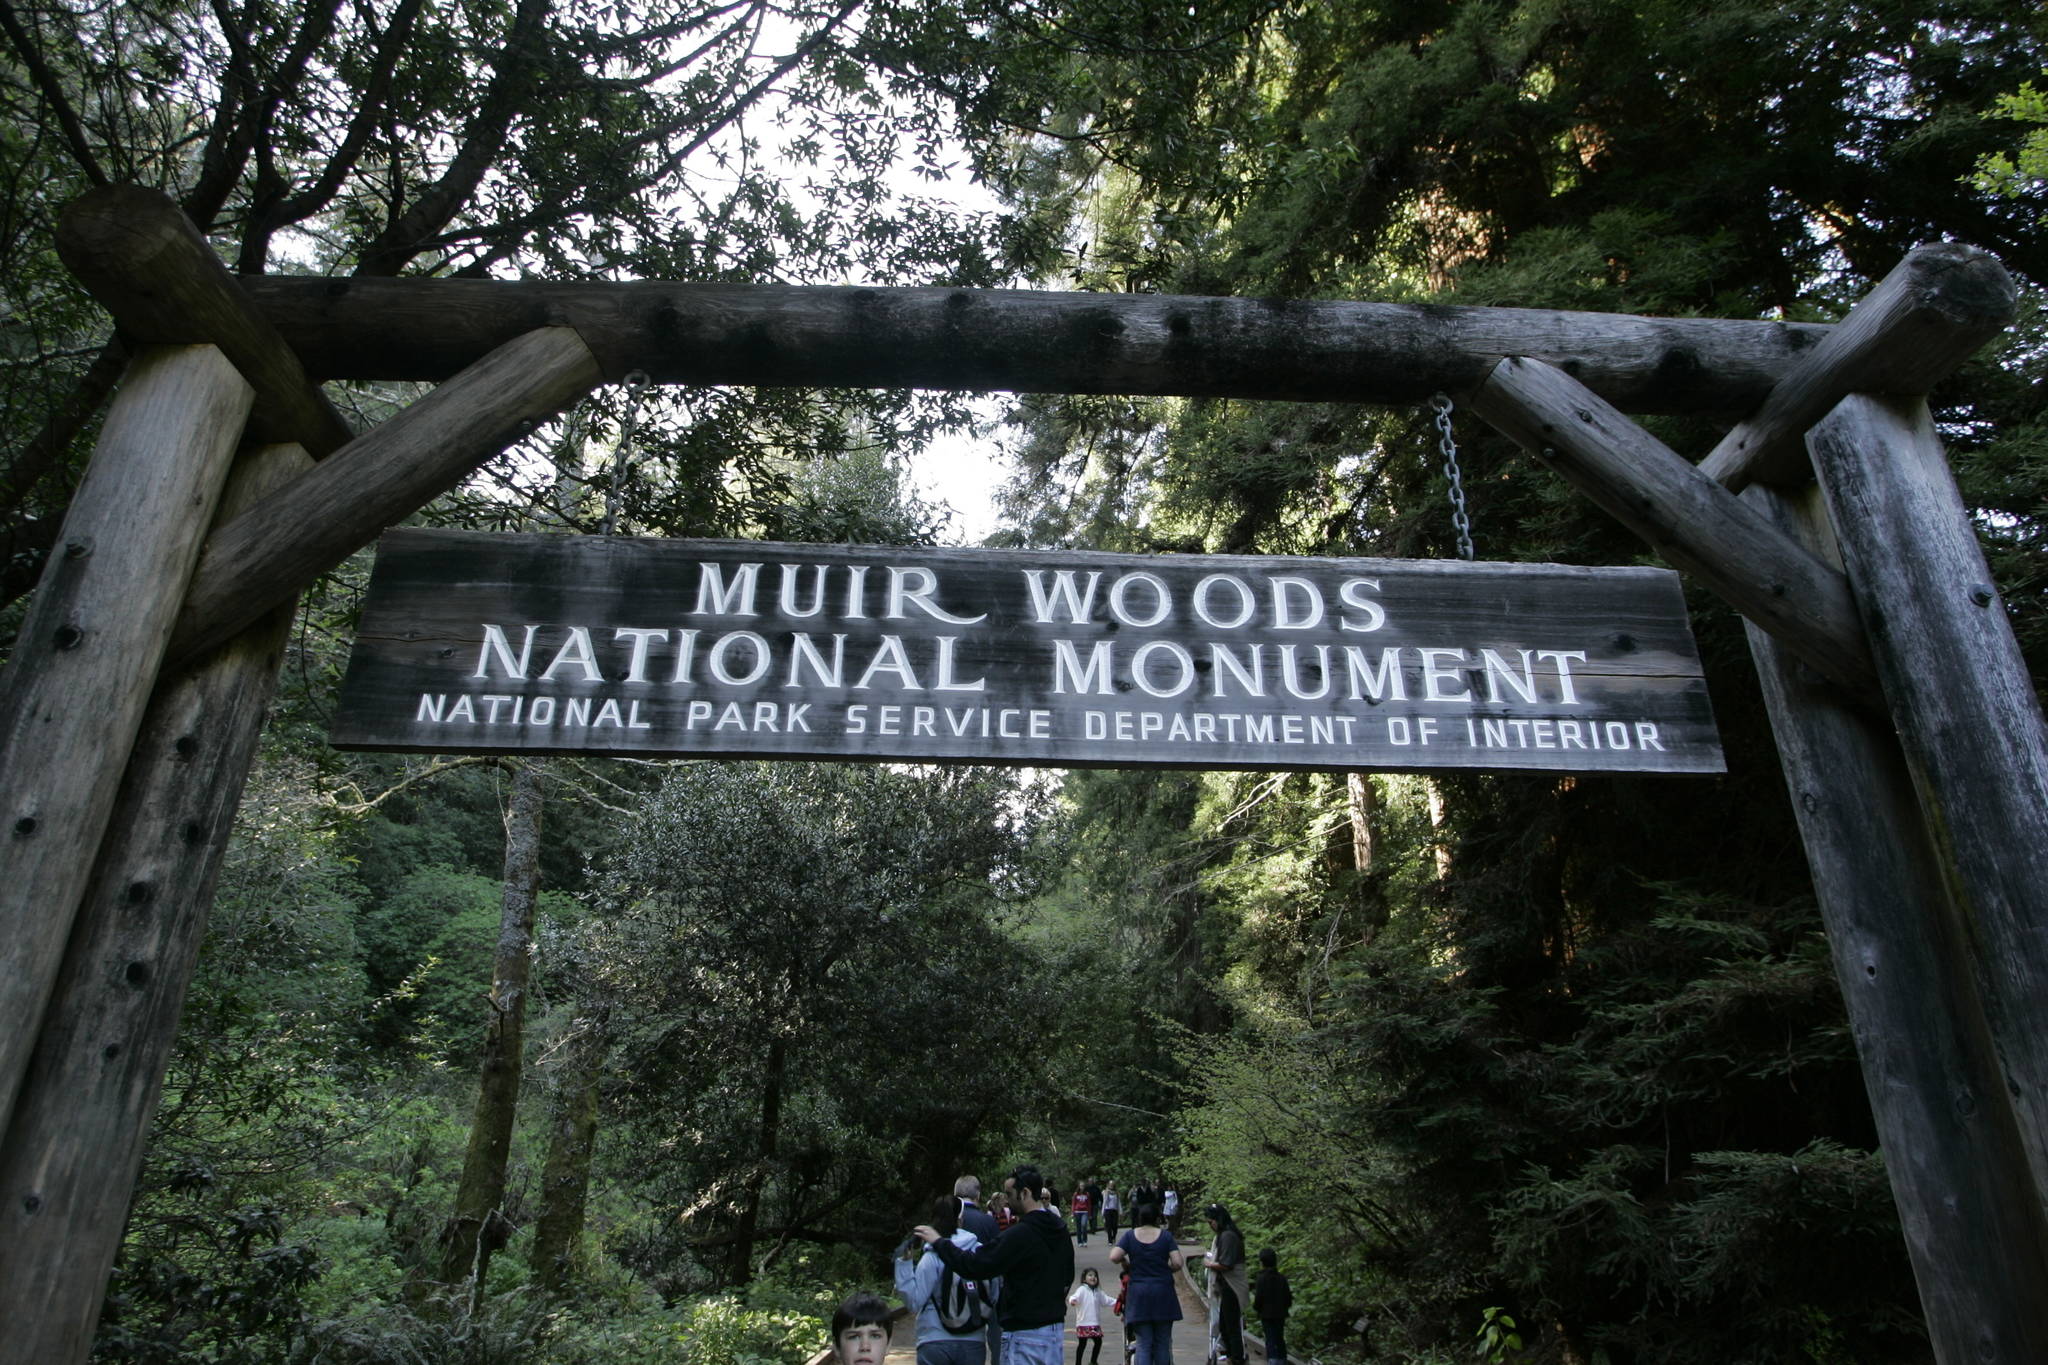 Eric Risberg | associated press file                                Visitors walk along a pathway near the entrance to the Muir Woods National Monument, named after John Muir, in Marin County, Calif. The Sierra Club is reckoning with the racist views of founder John Muir, the naturalist who helped spawn environmentalism. The San Francisco-based environmental group said Wednesday, July 22, 2020, that Muir was part of the group’s history perpetuating white supremacy.